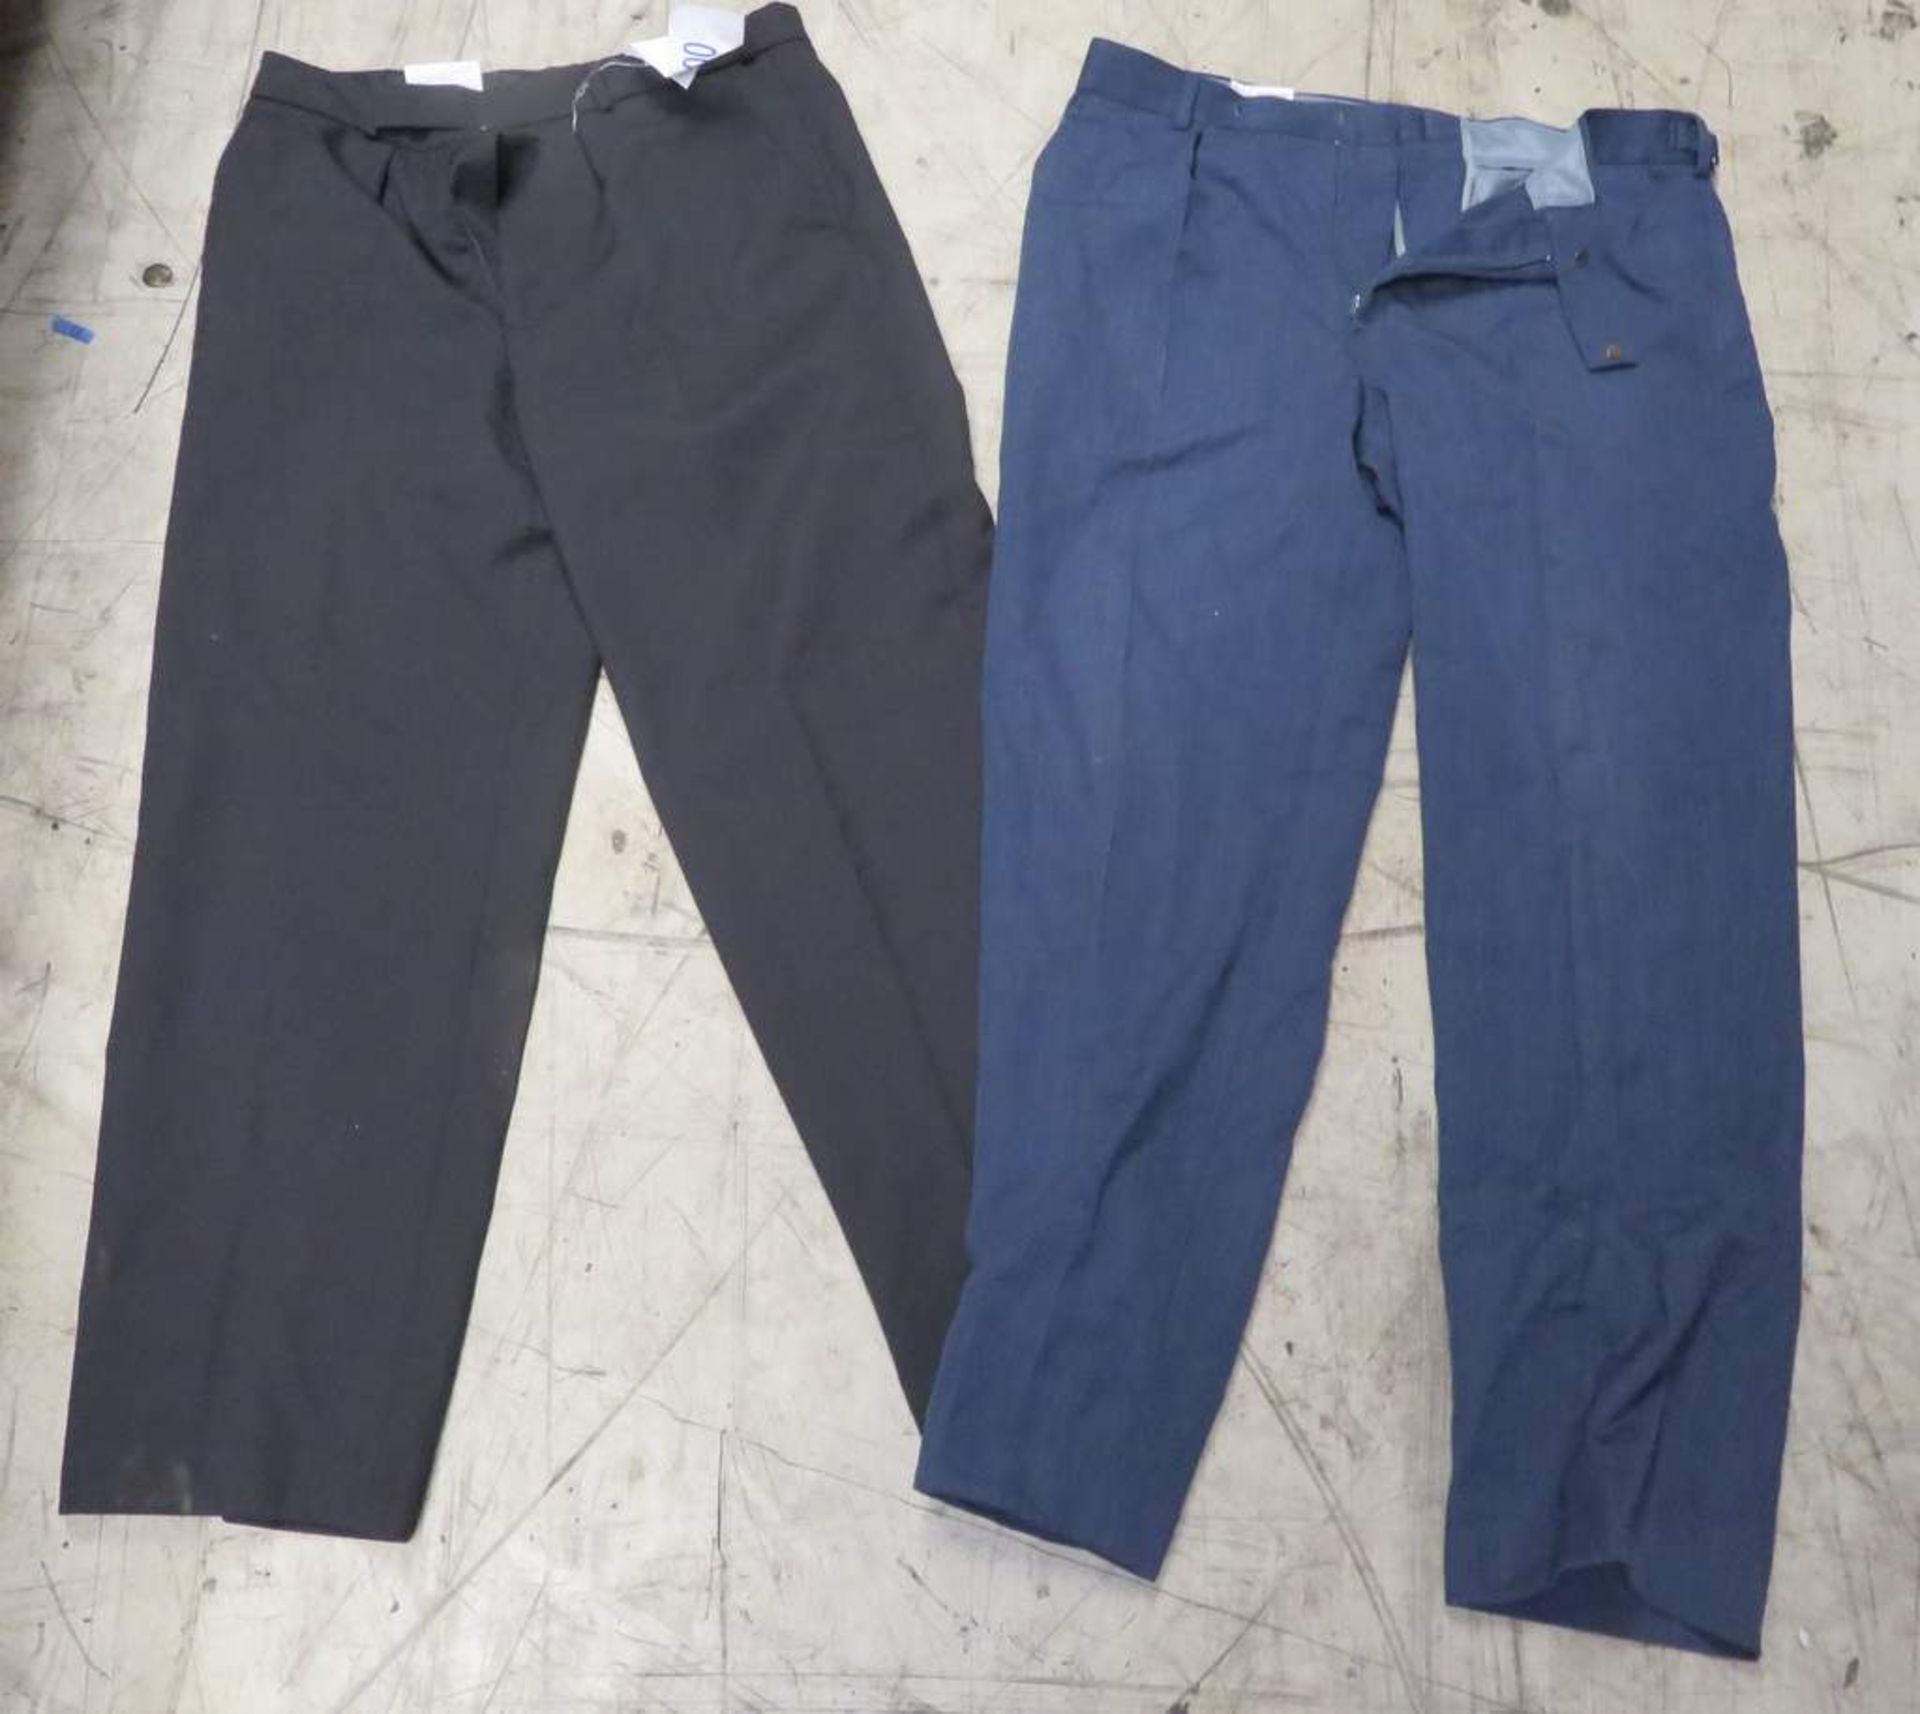 No3 & No2 Mens dress trousers black and blue - Approximately 300 - Various sizes - Image 3 of 3